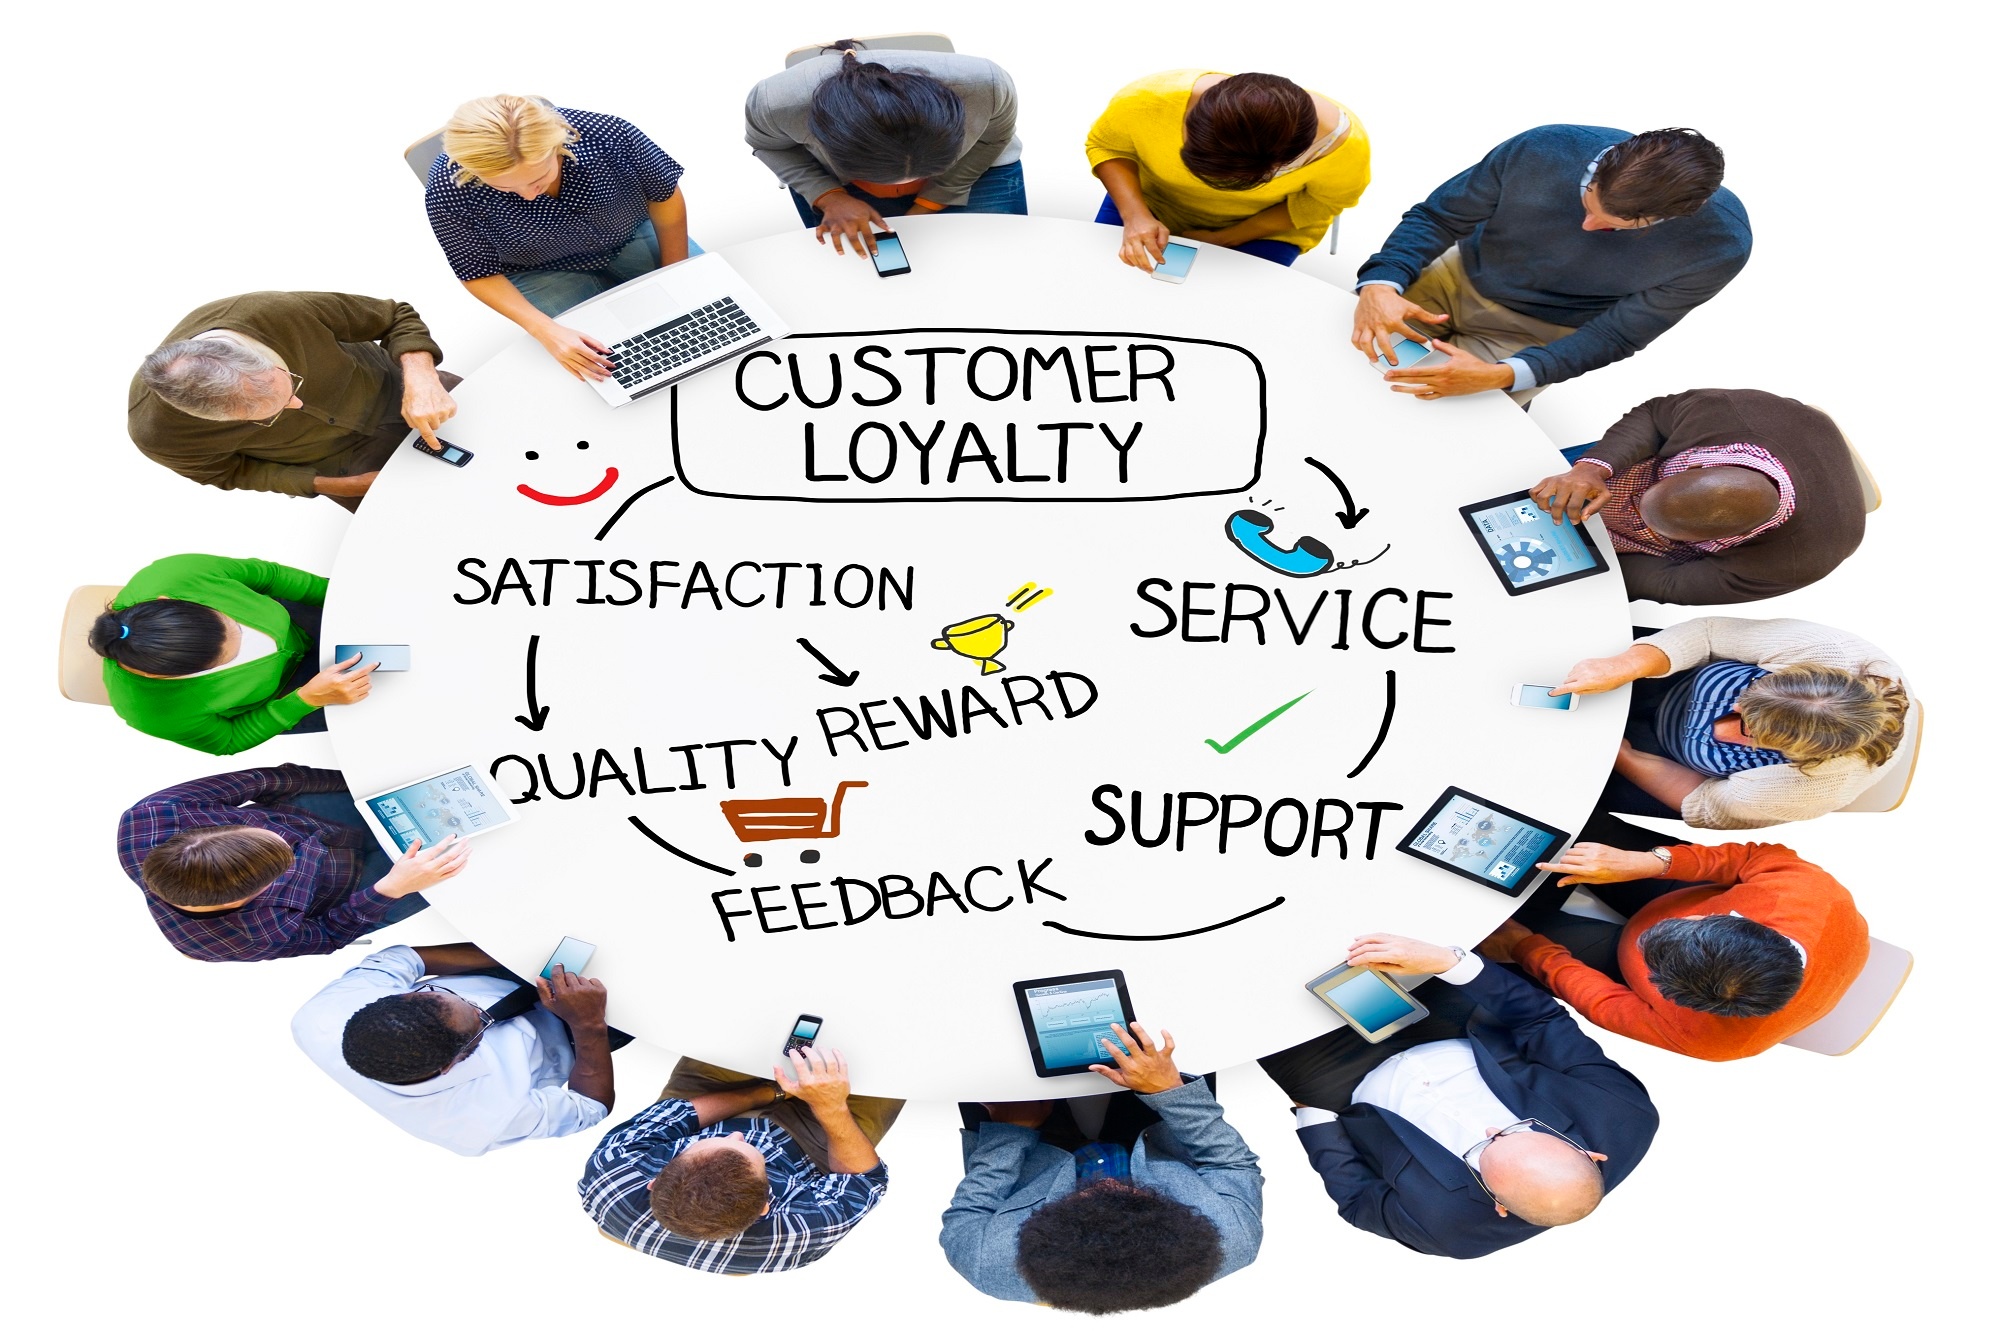 How Online Businesses Can Build Customer Loyalty in 2017 